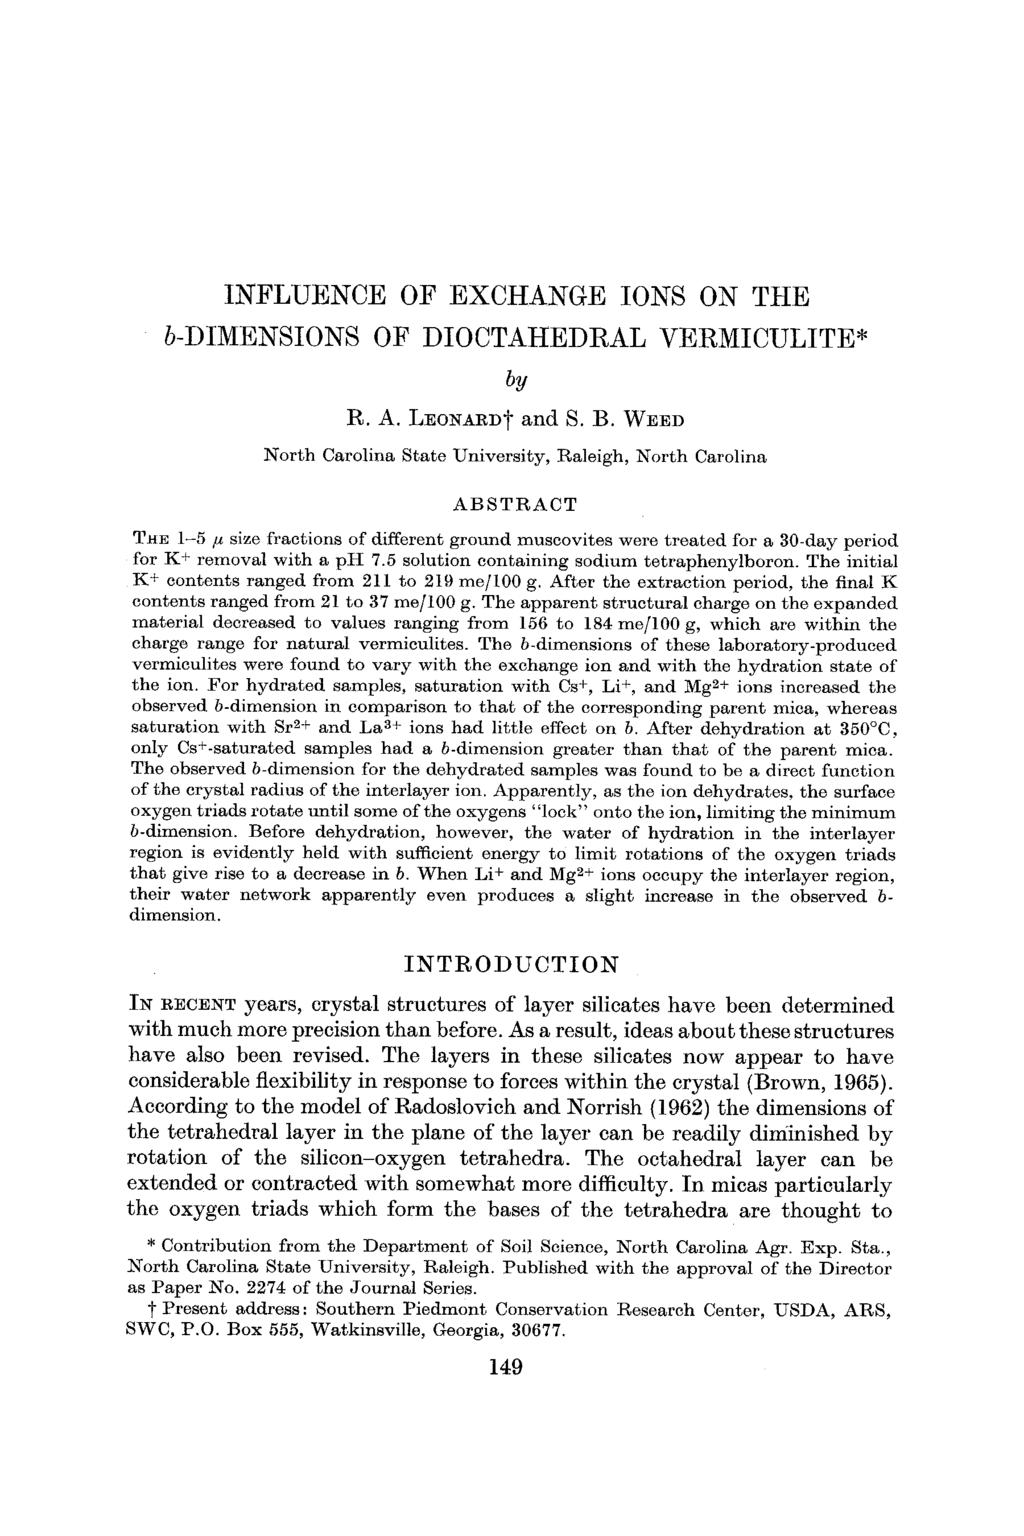 INFLUENCE OF EXCHANGE IONS ON THE b-dimensions OF DIOCTAHEDRAL VERMICULITE* by R. A. LEONARD t and S. B.